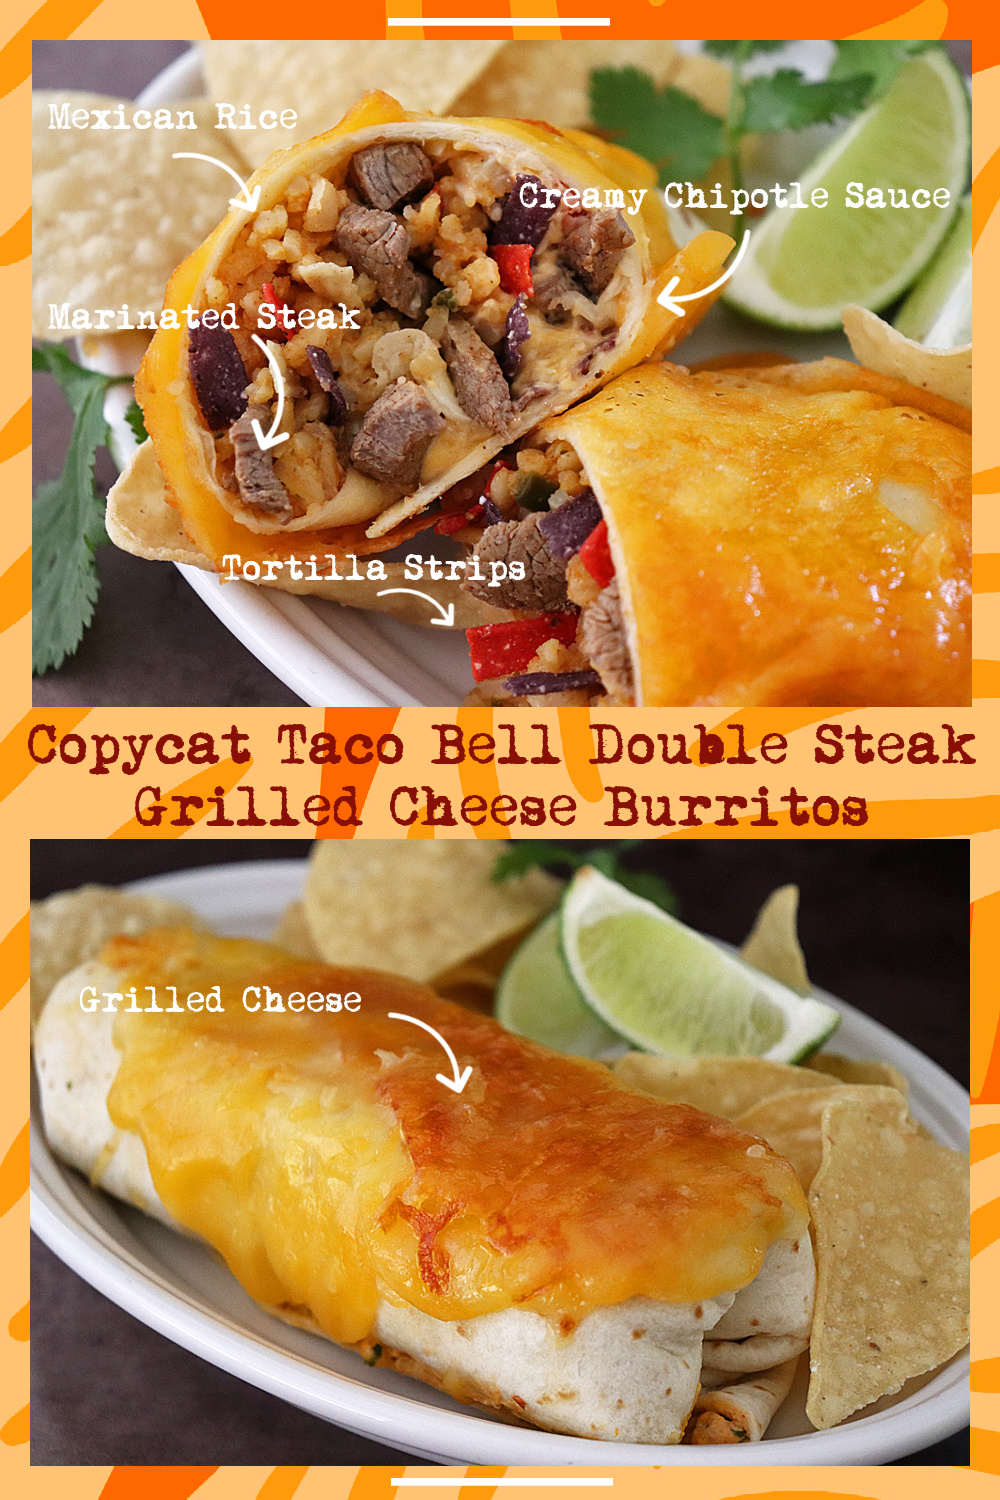 Taco Bell Double Steak Grilled Cheese Burrito (Copycat Recipe)